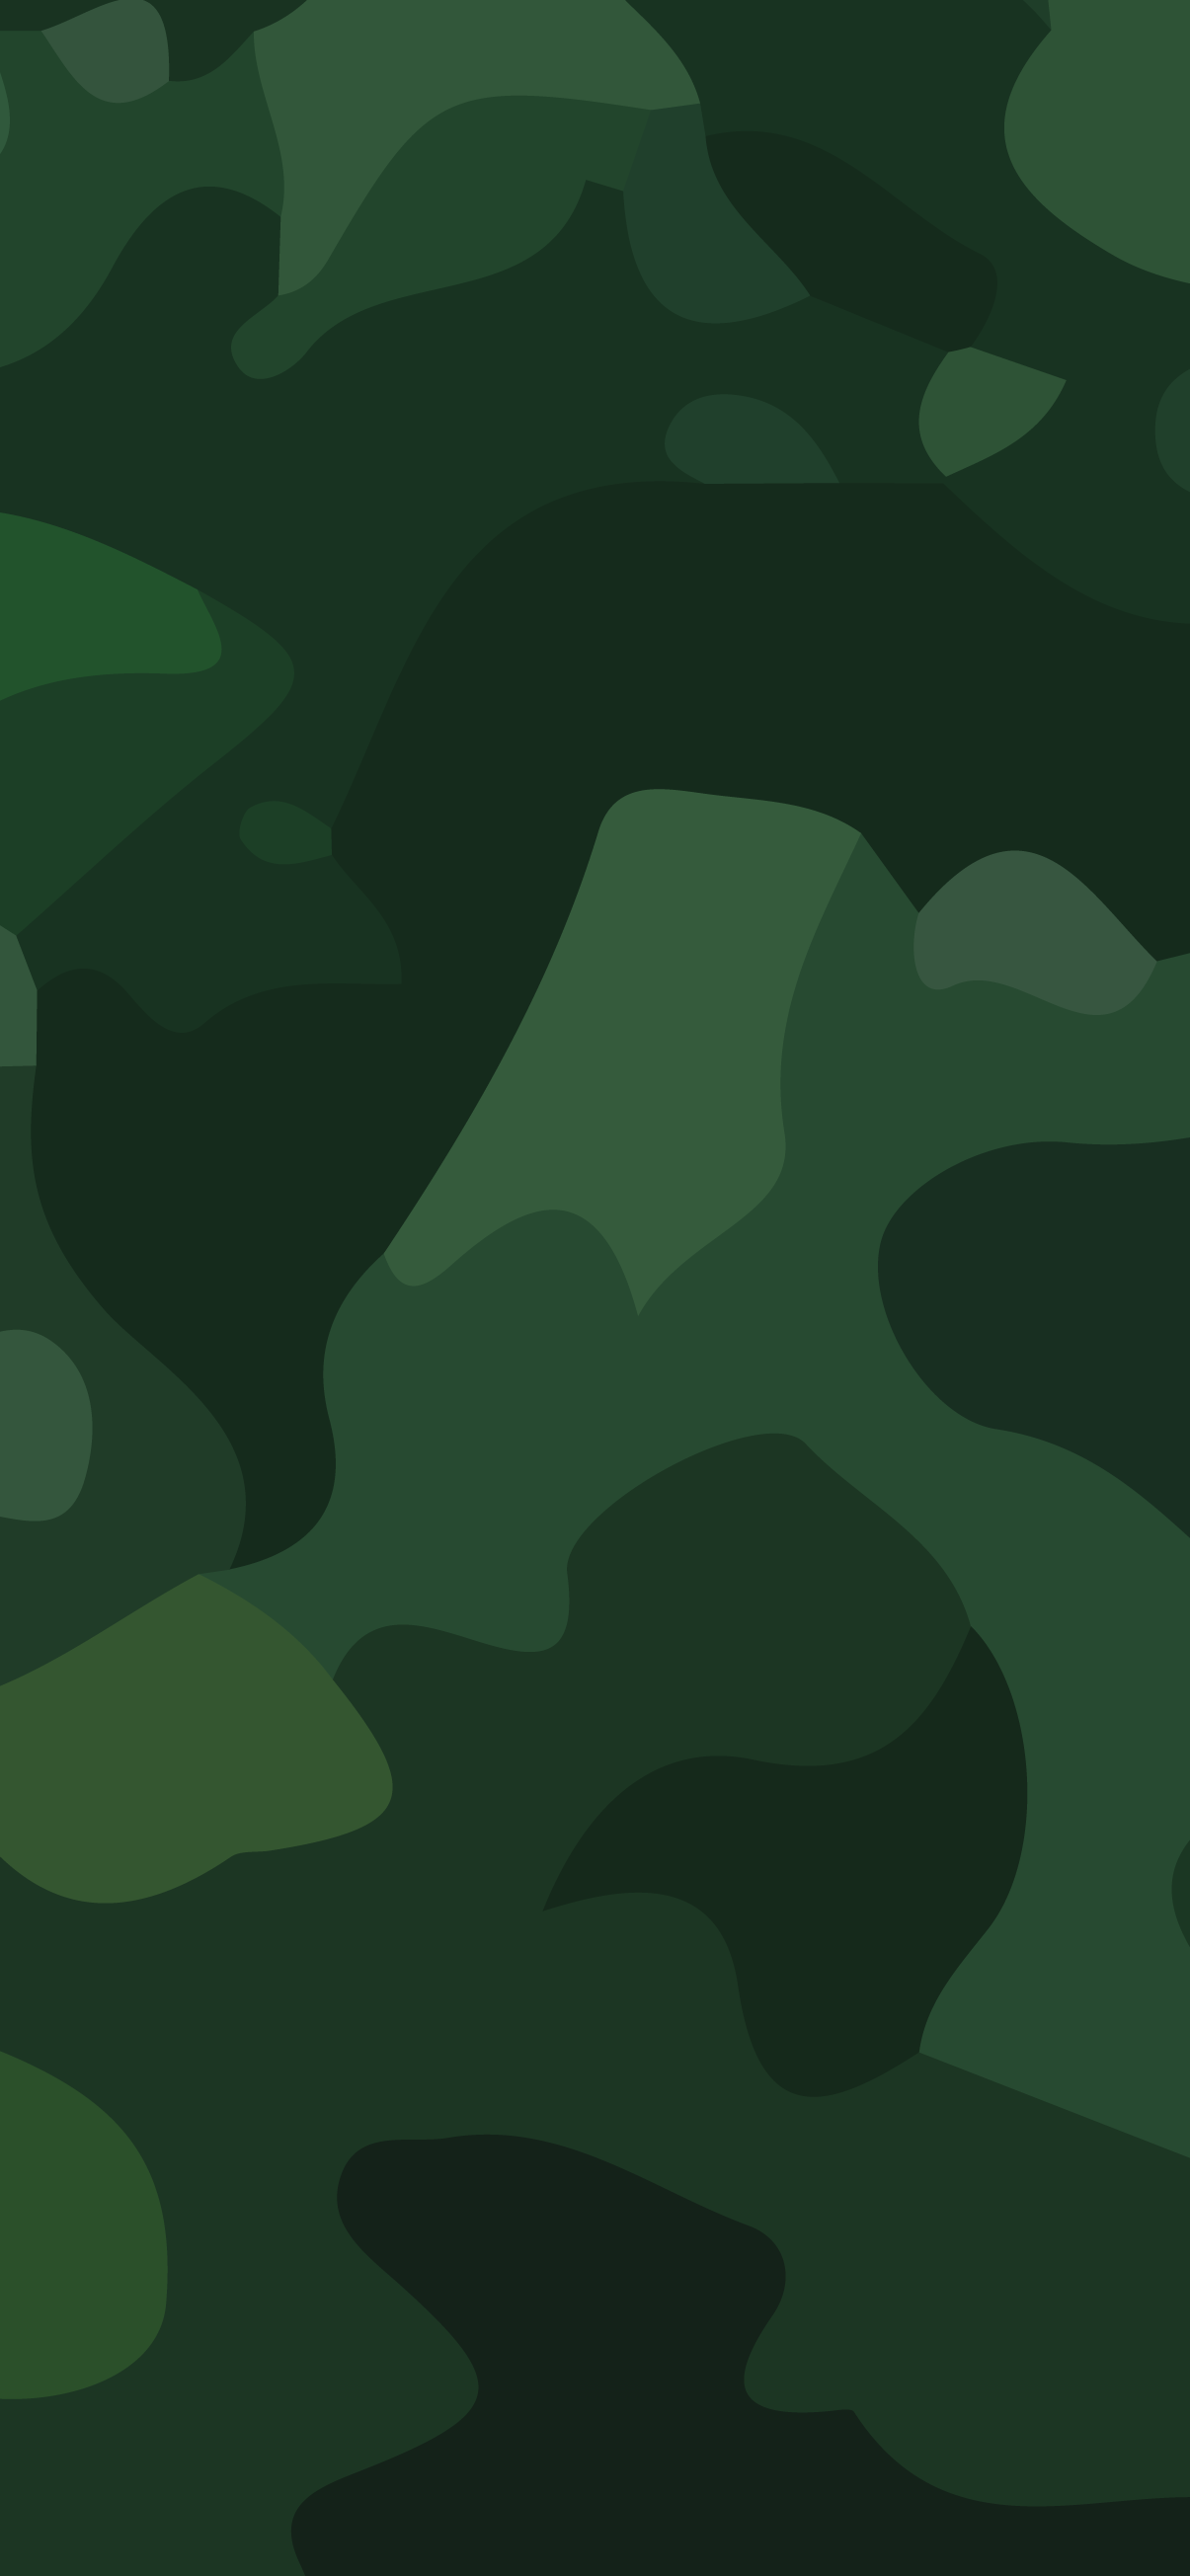 HD wallpaper Camouflage Art Abstract Army Green Brown Black   Wallpaper Flare